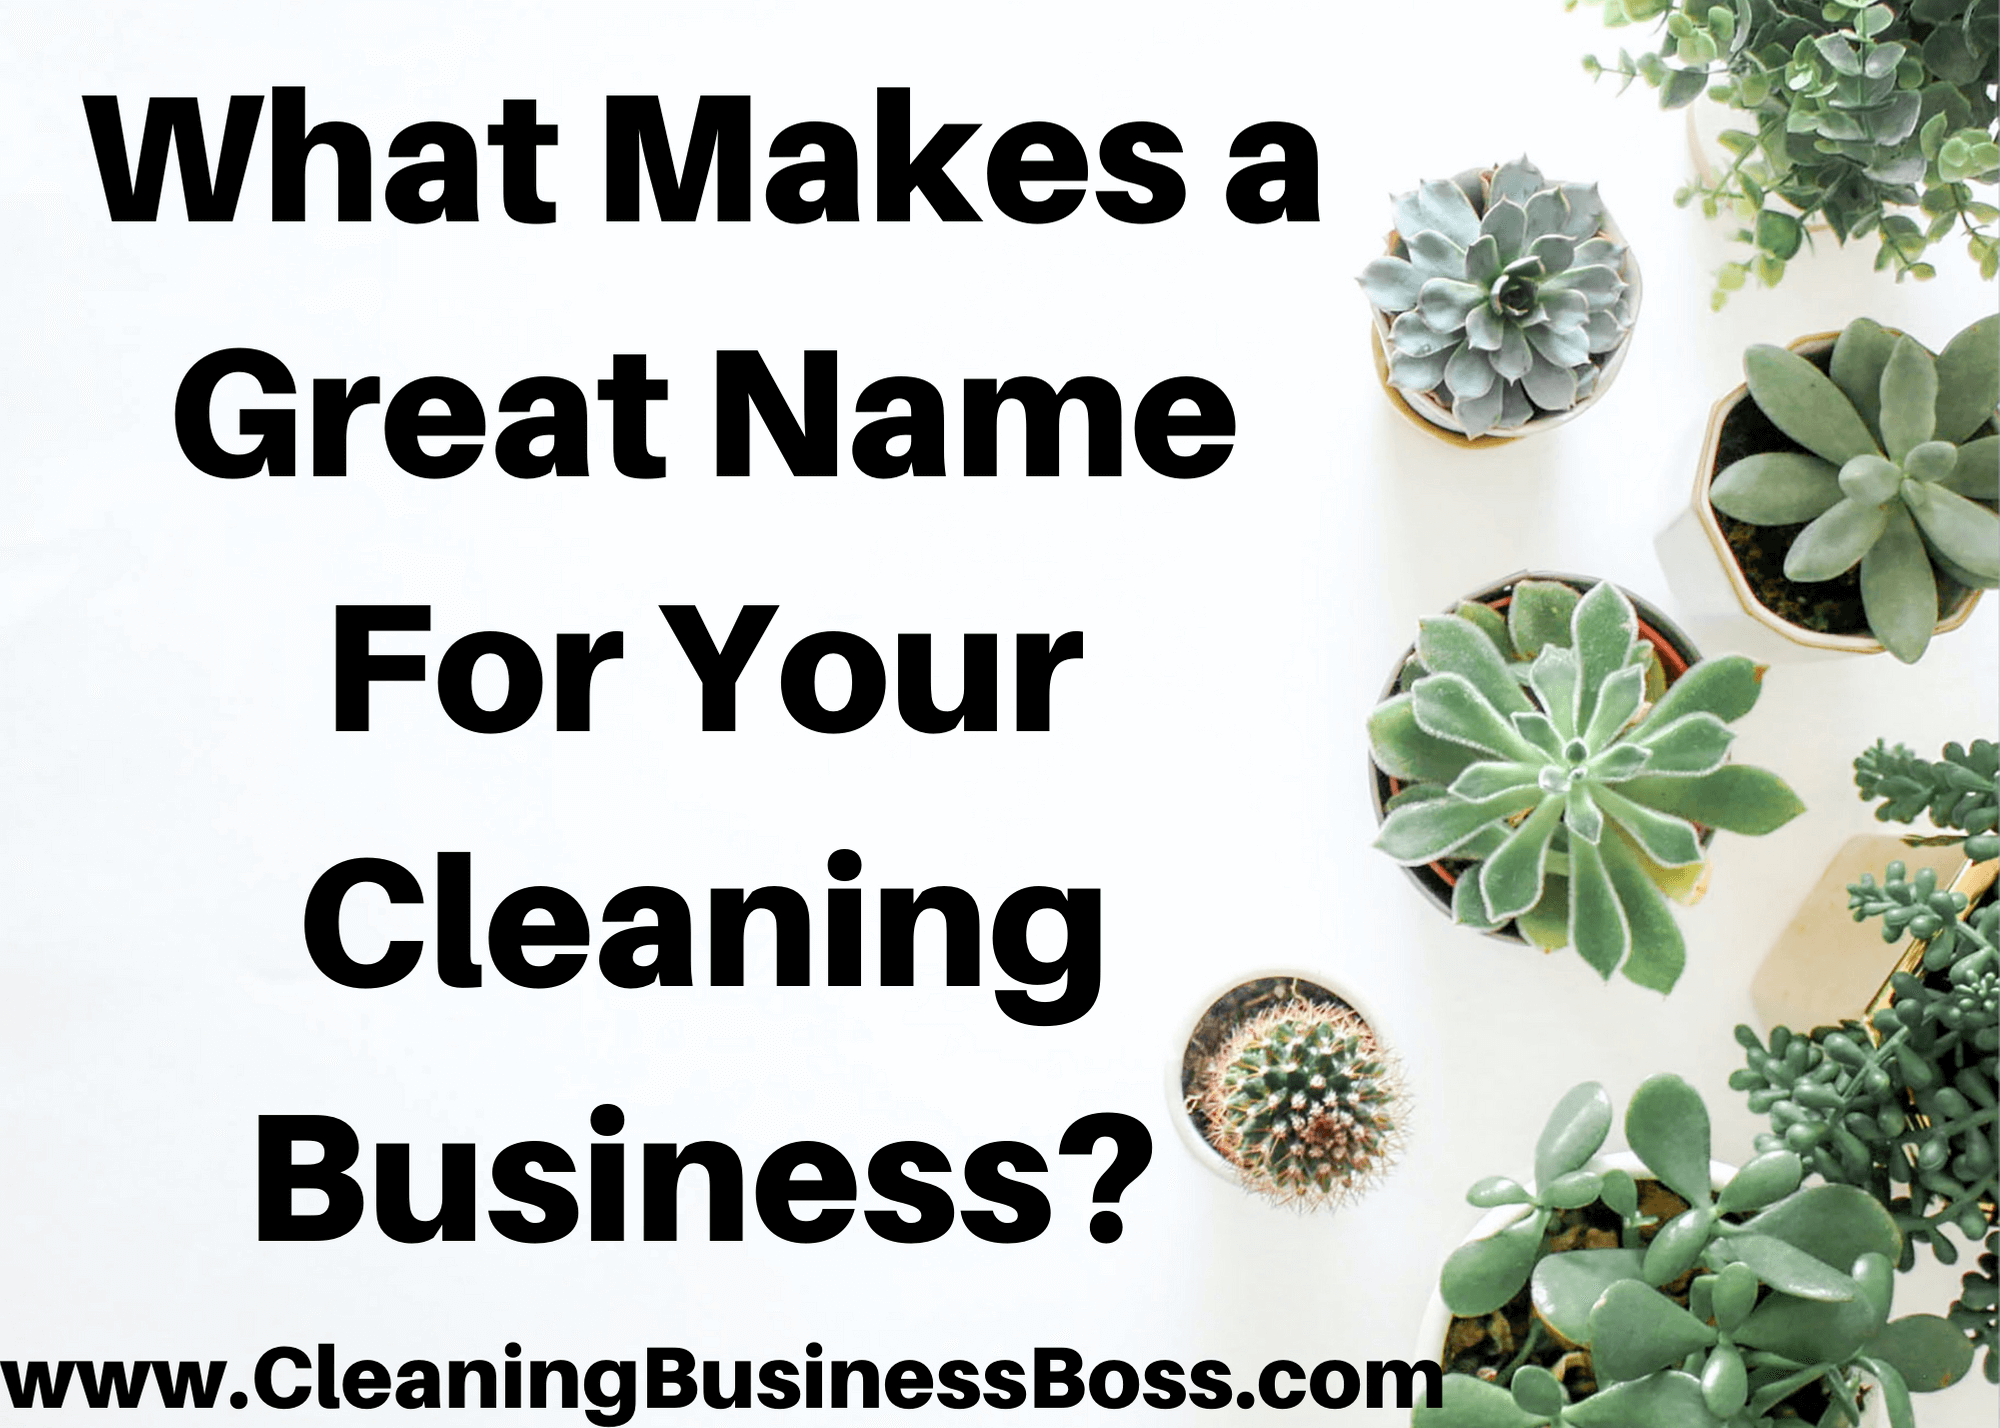 What Makes A Great Name For a Cleaning Business?